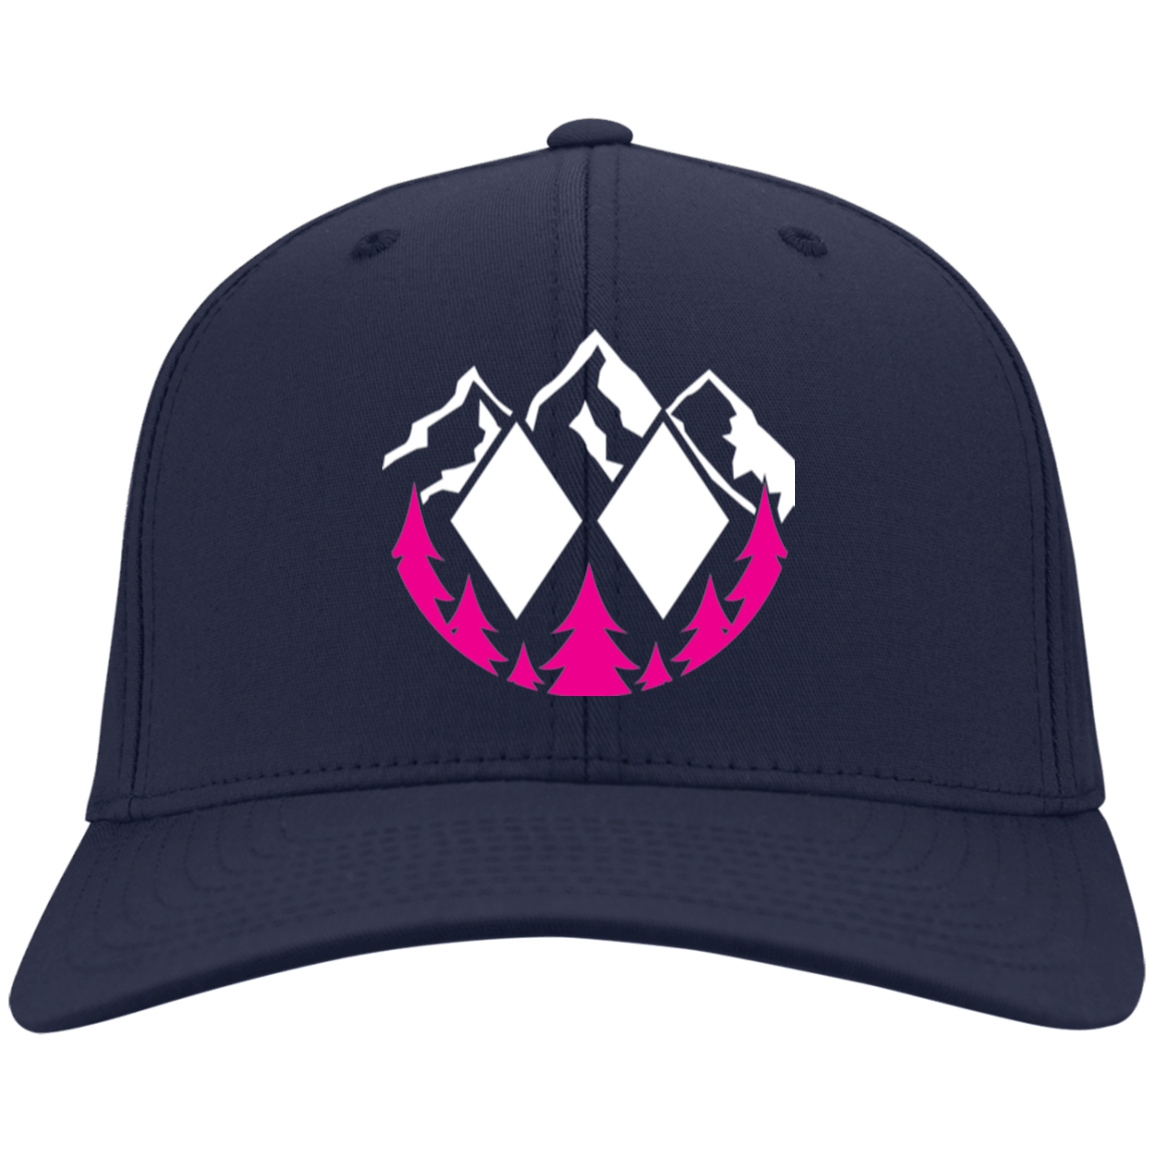 Black Diamonds Are A Girl's Best Friend Caps and Beanies - Powderaddicts